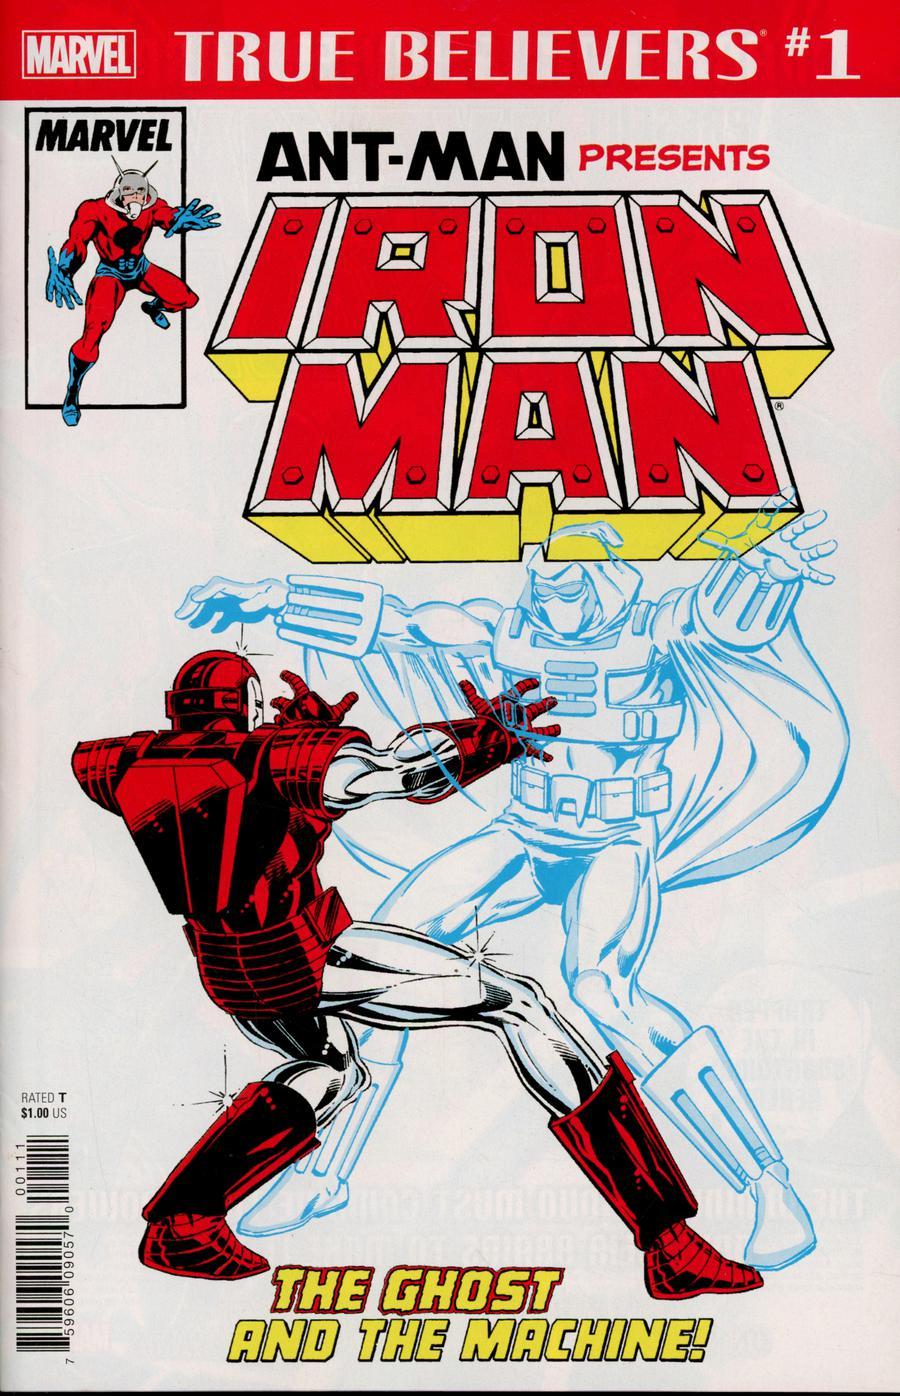 True Believers Ant-Man Presents Iron Man The Ghost And The Machine Vol. 1 #1